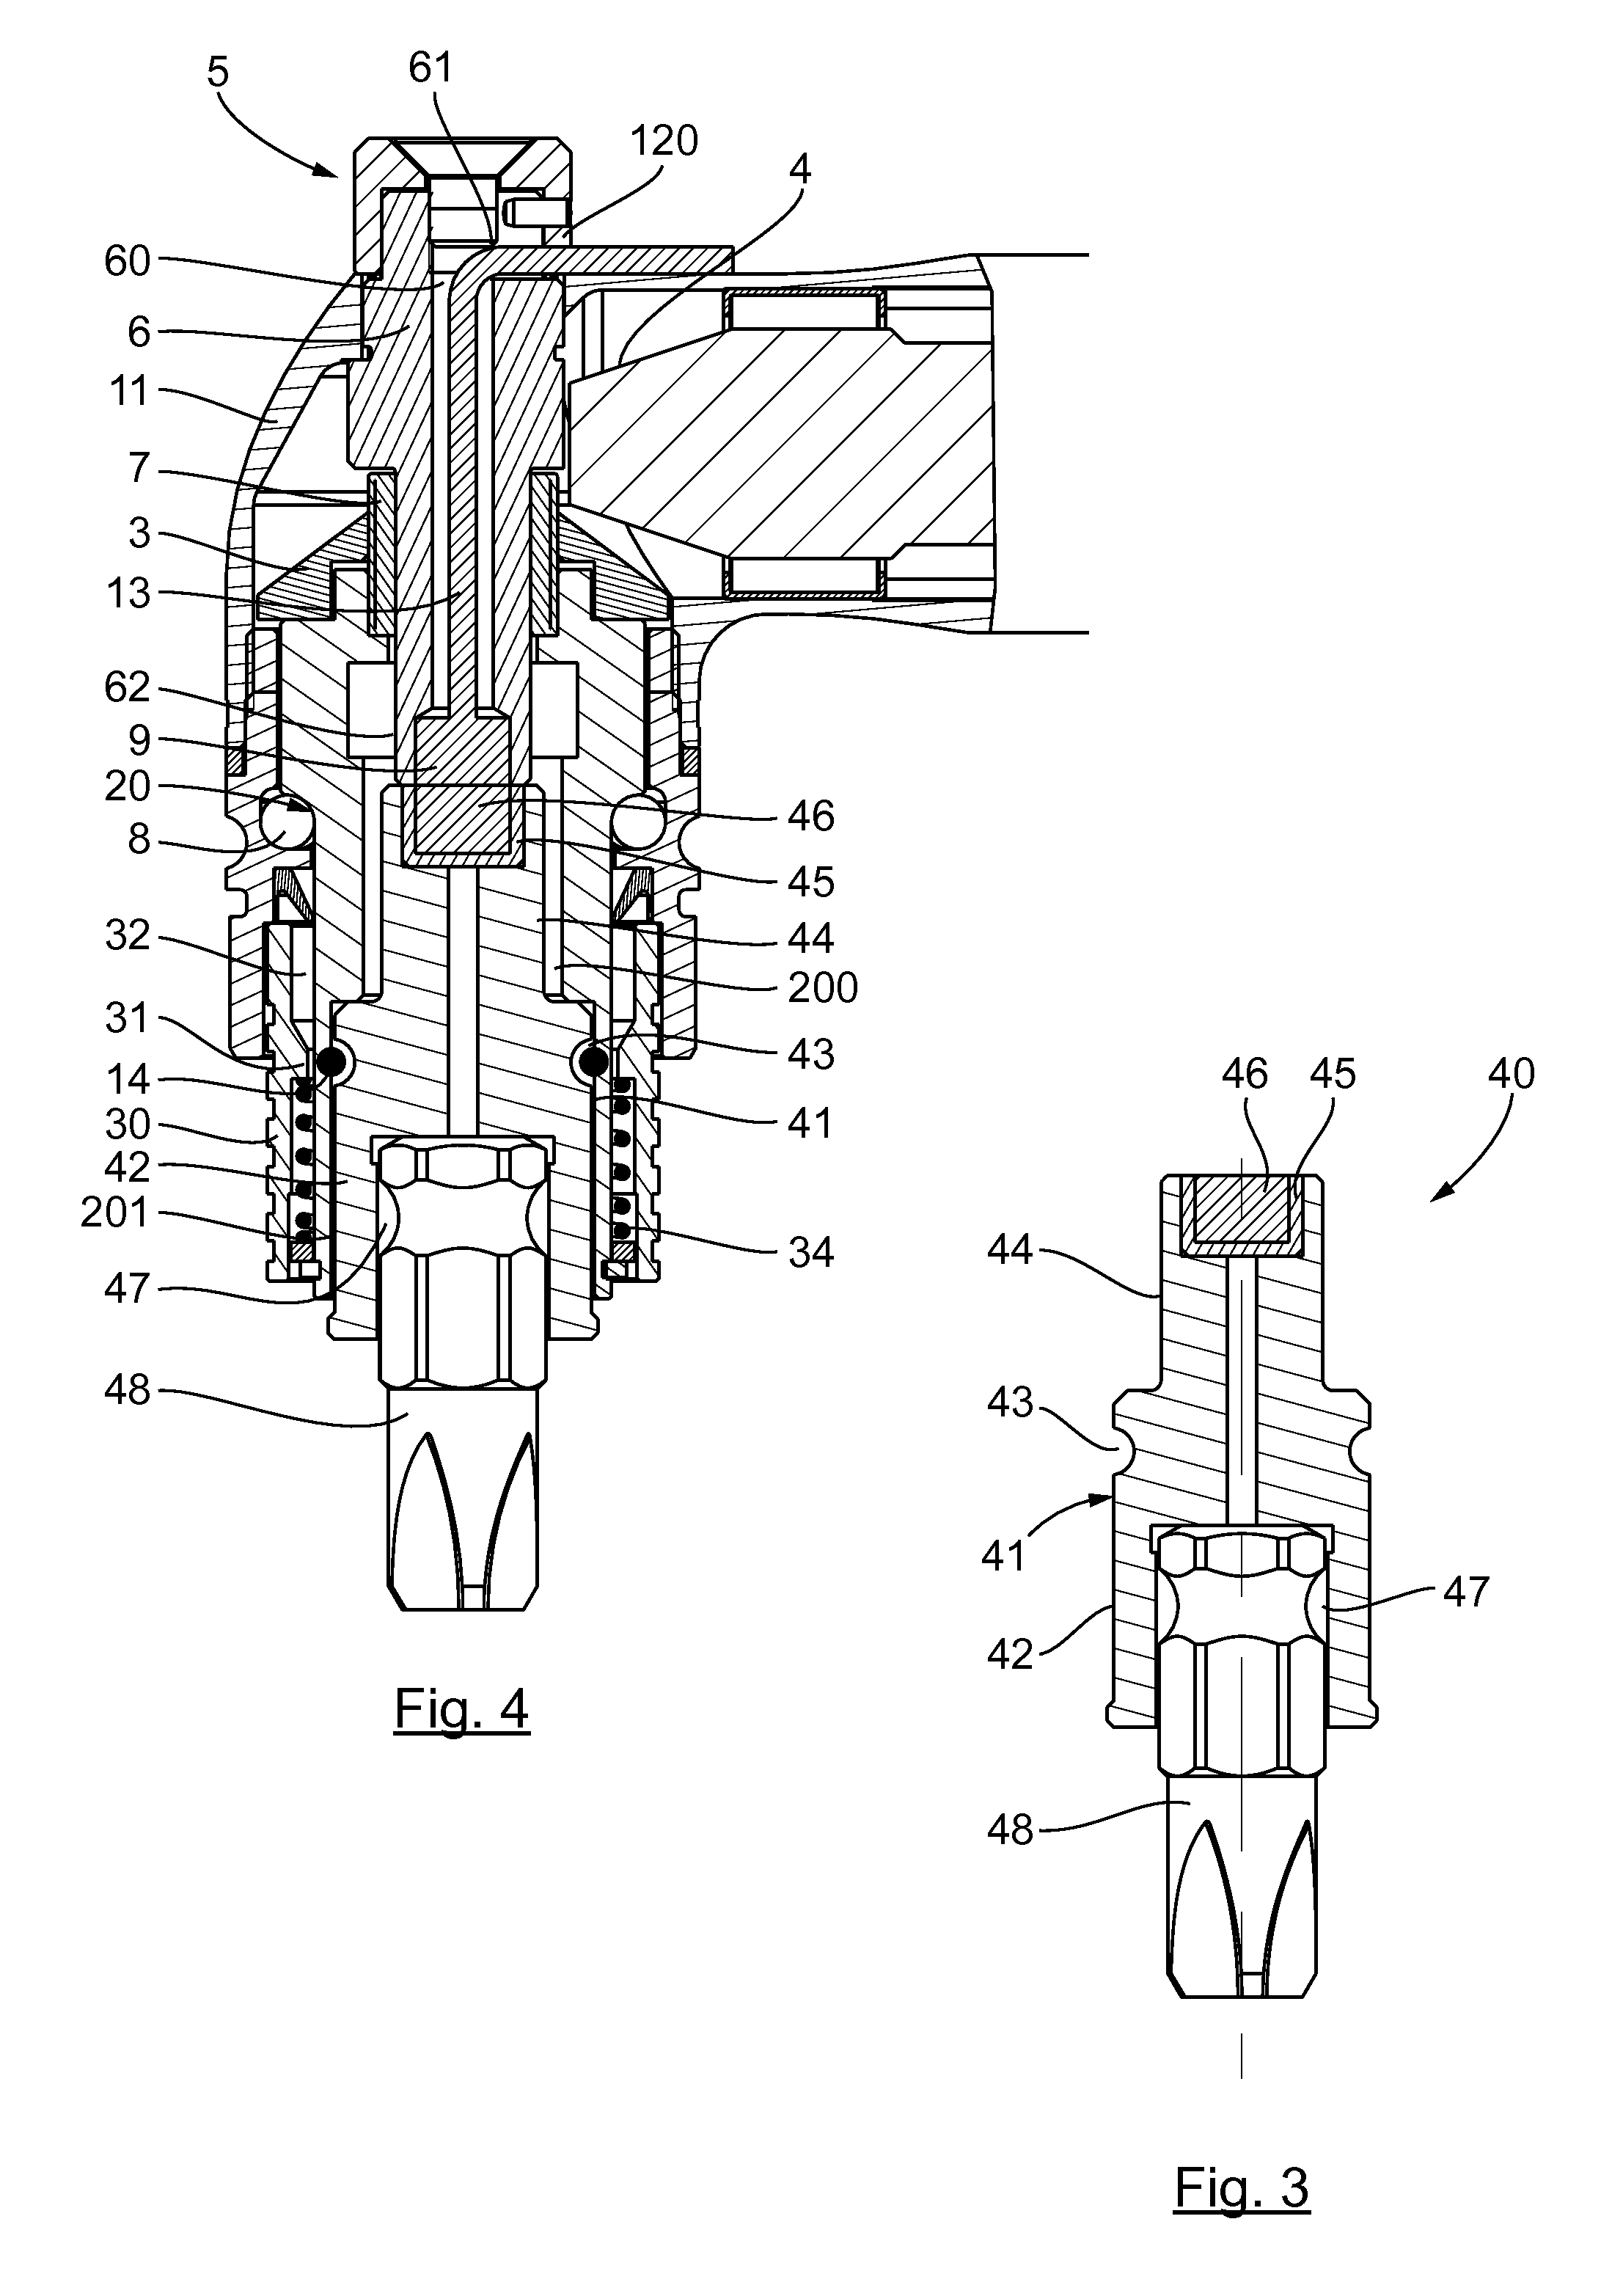 Screw driving device for recognizing screwing accessories in the coaxial position